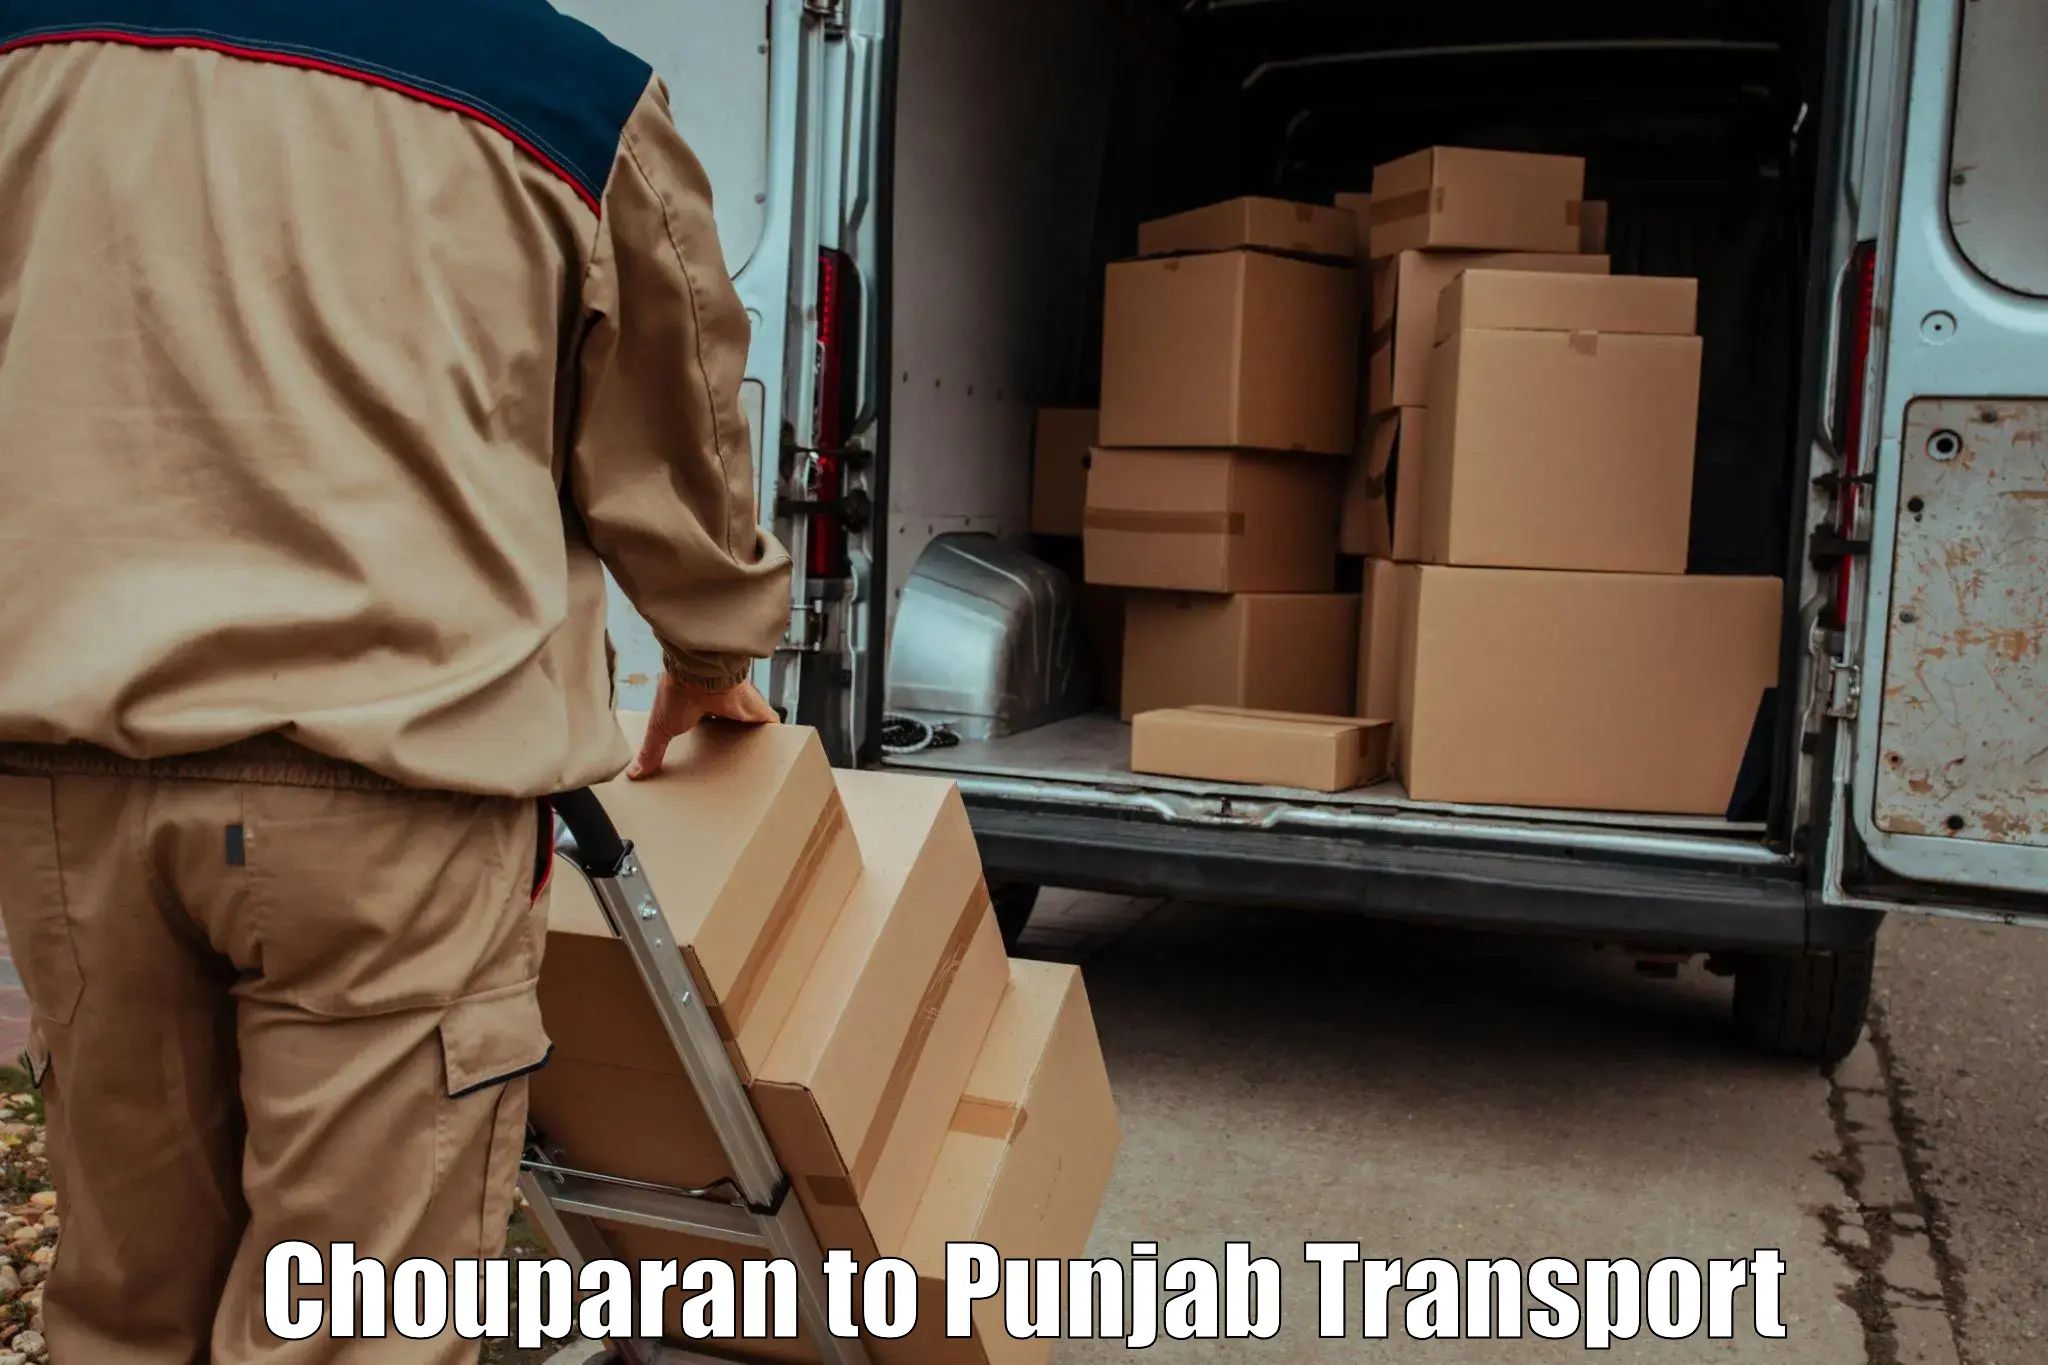 Transport in sharing in Chouparan to Jagraon